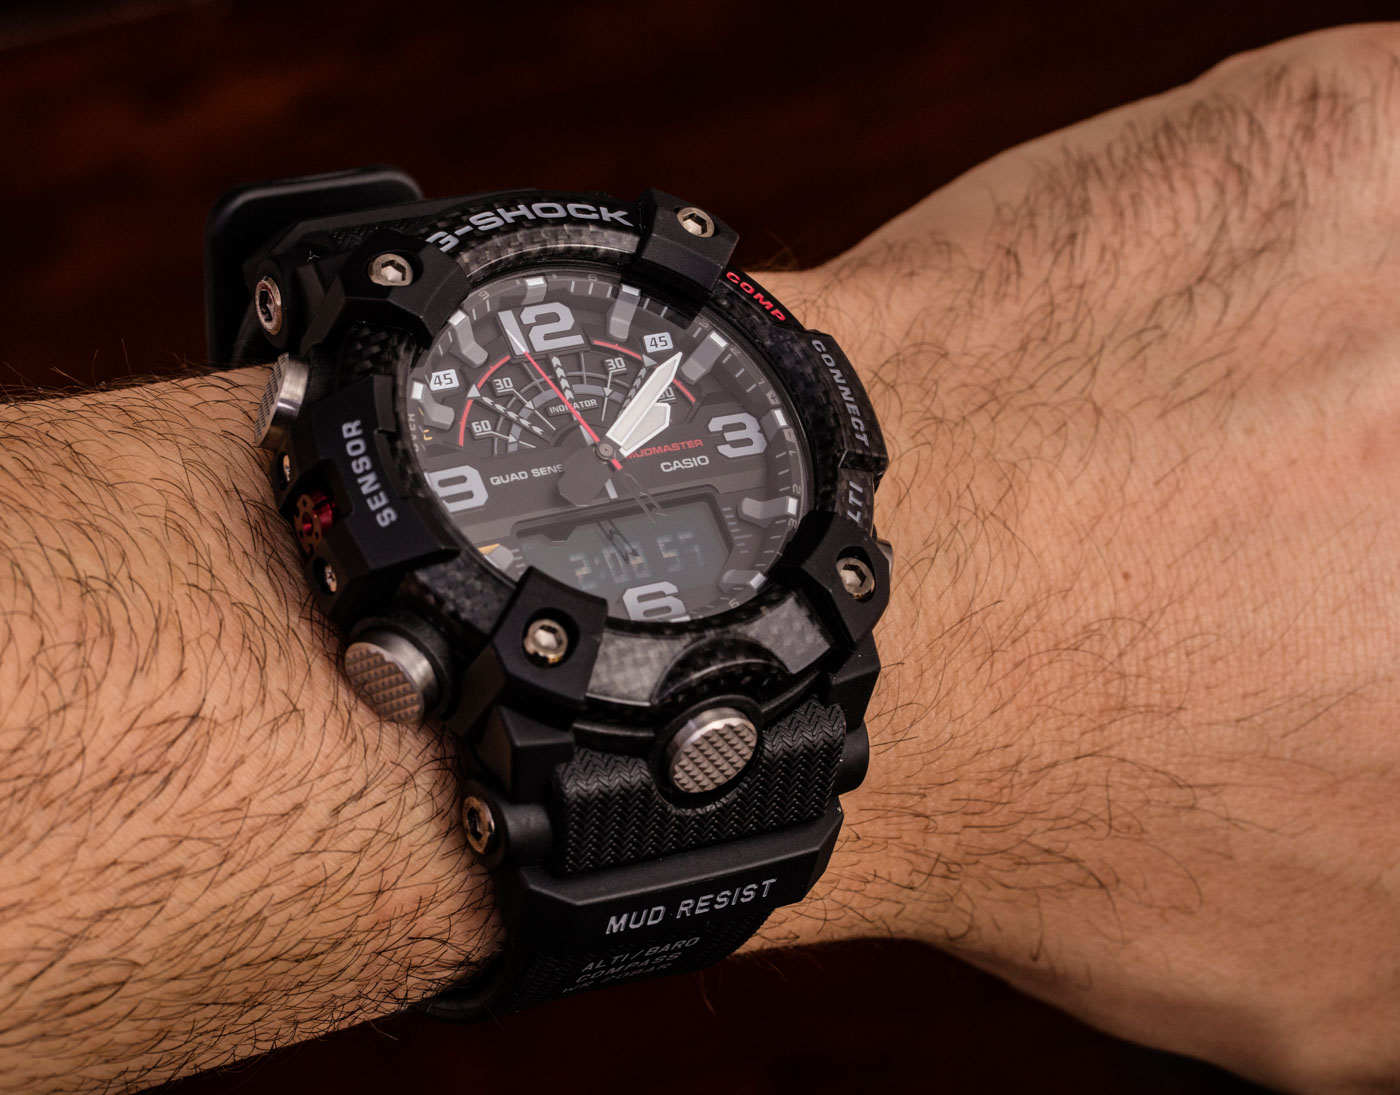 Casio G-Shock Mudmaster GG-B100 Watch Review: Full Of Style, Value,  Features